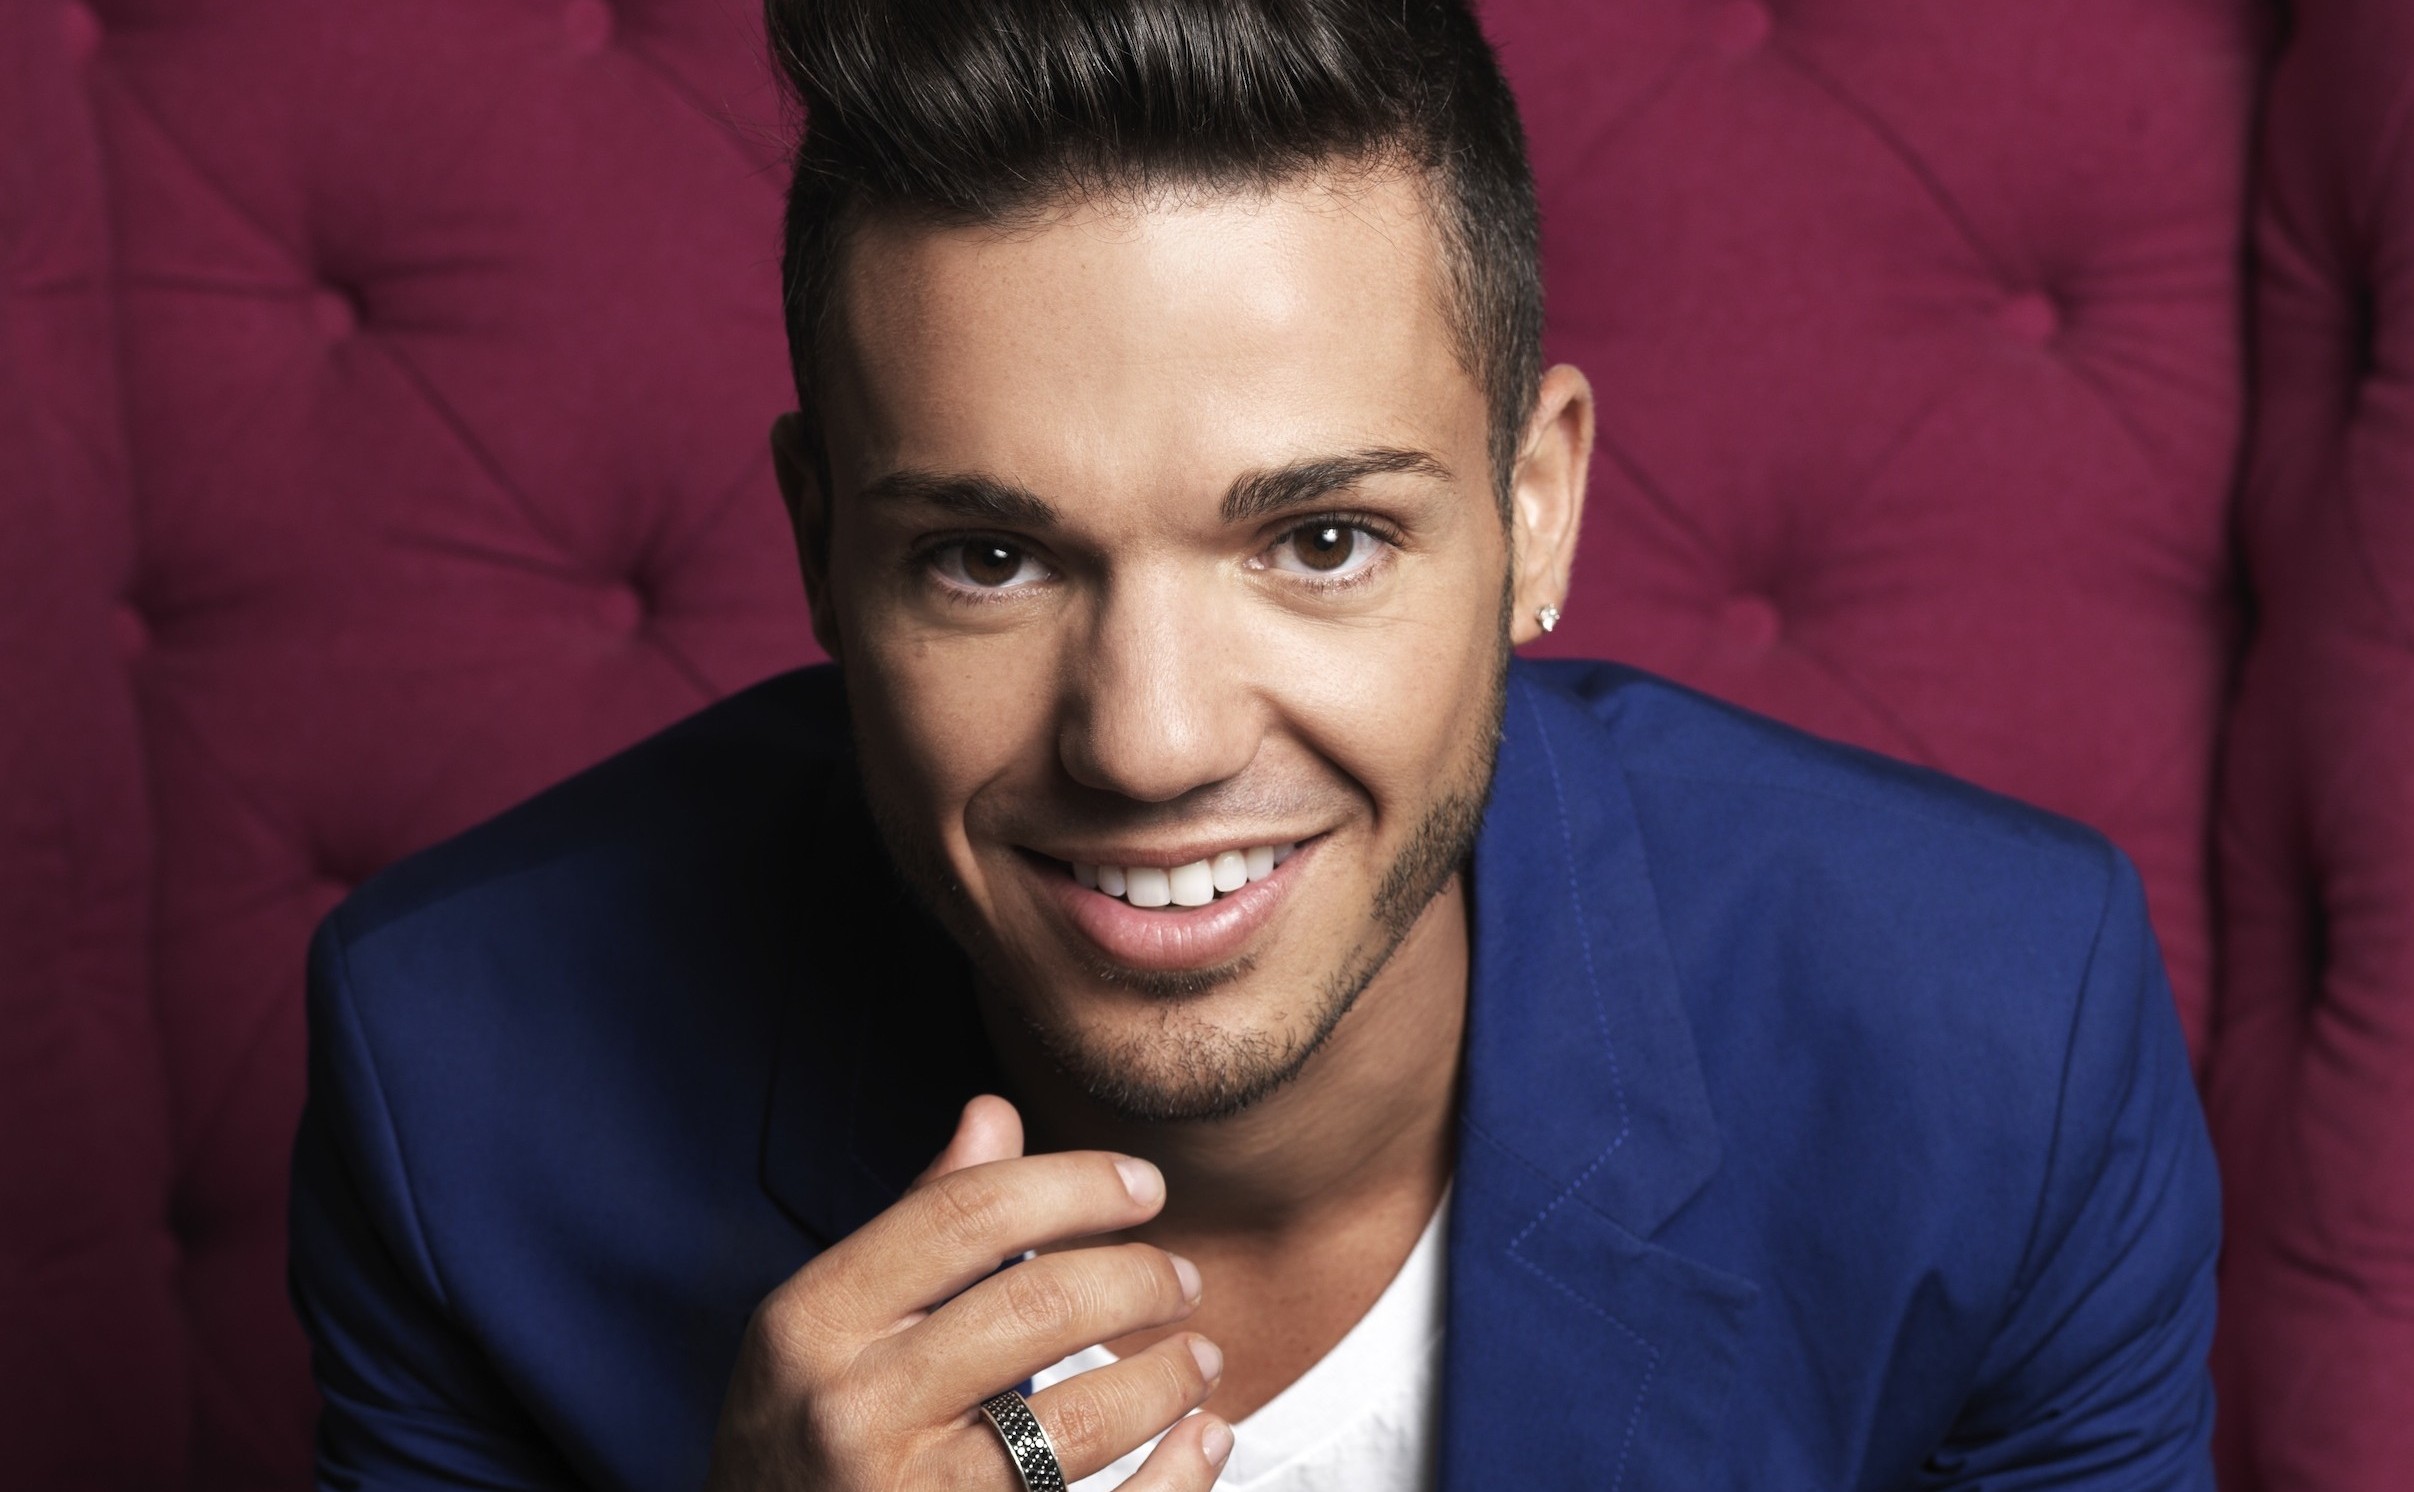 Anthony Callea on singing, LGBTI acceptance, and his love of Christmas